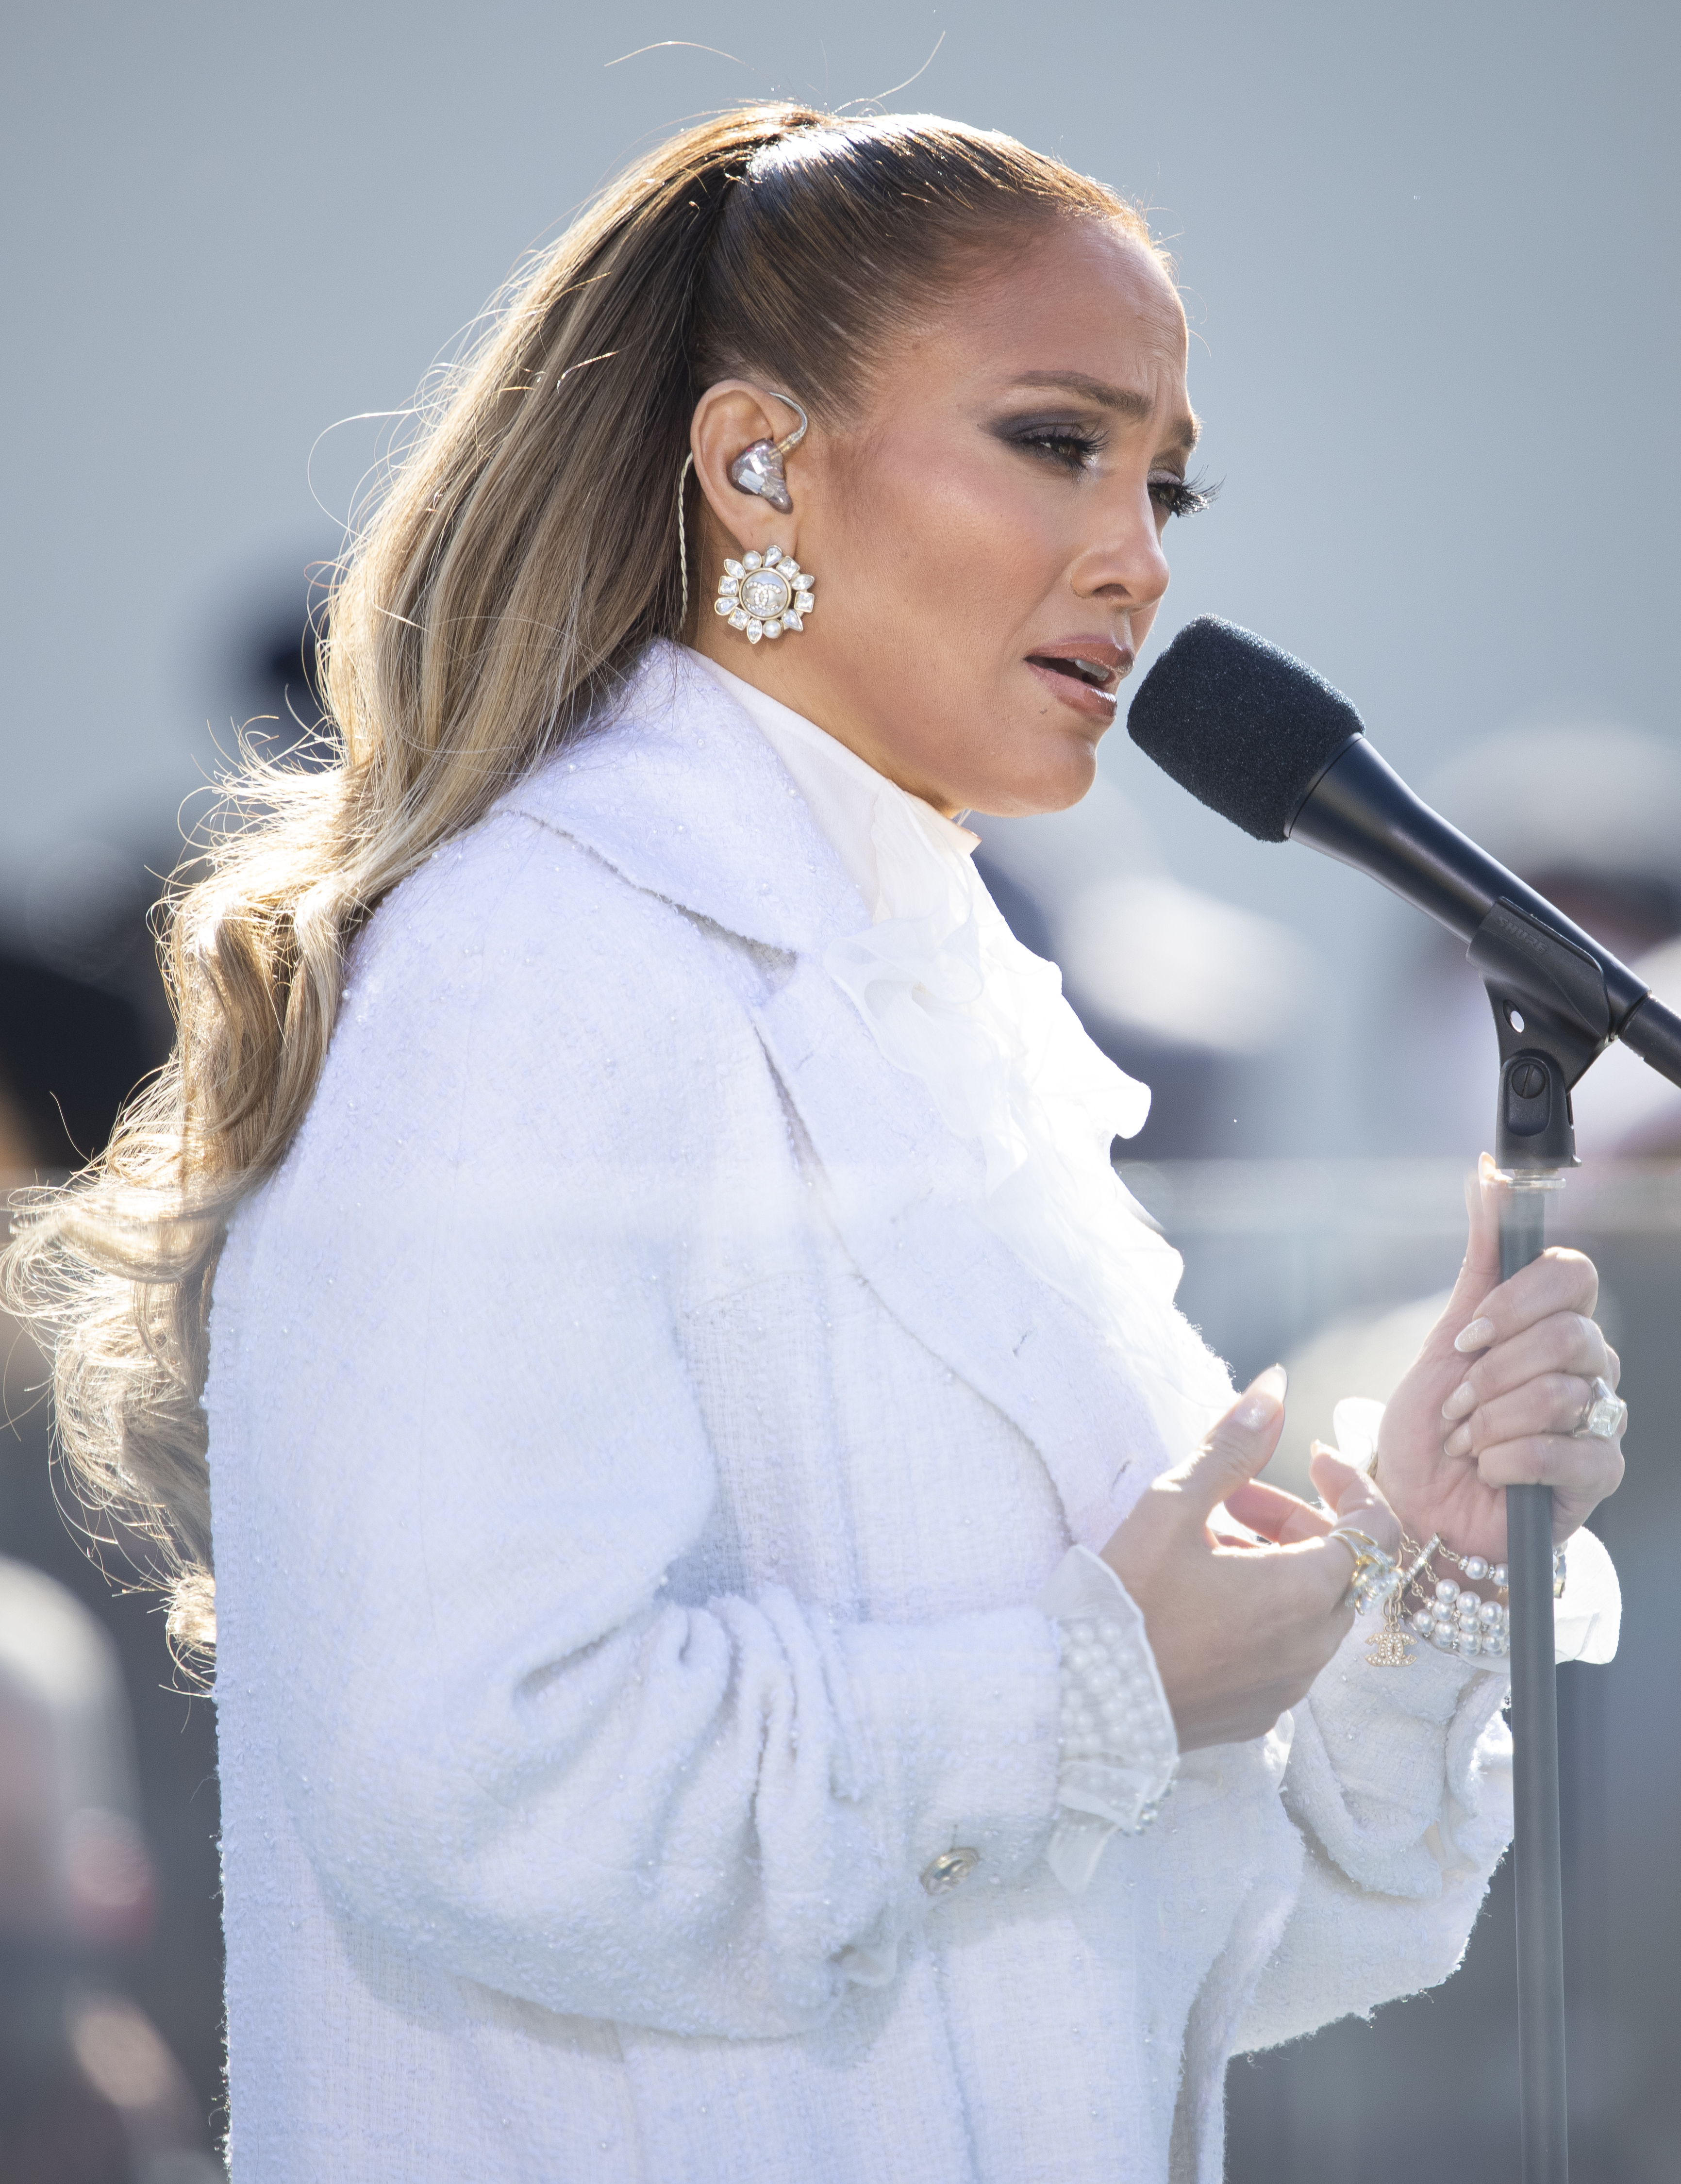 Jennifer Lopez in a white suit singing into a microphone